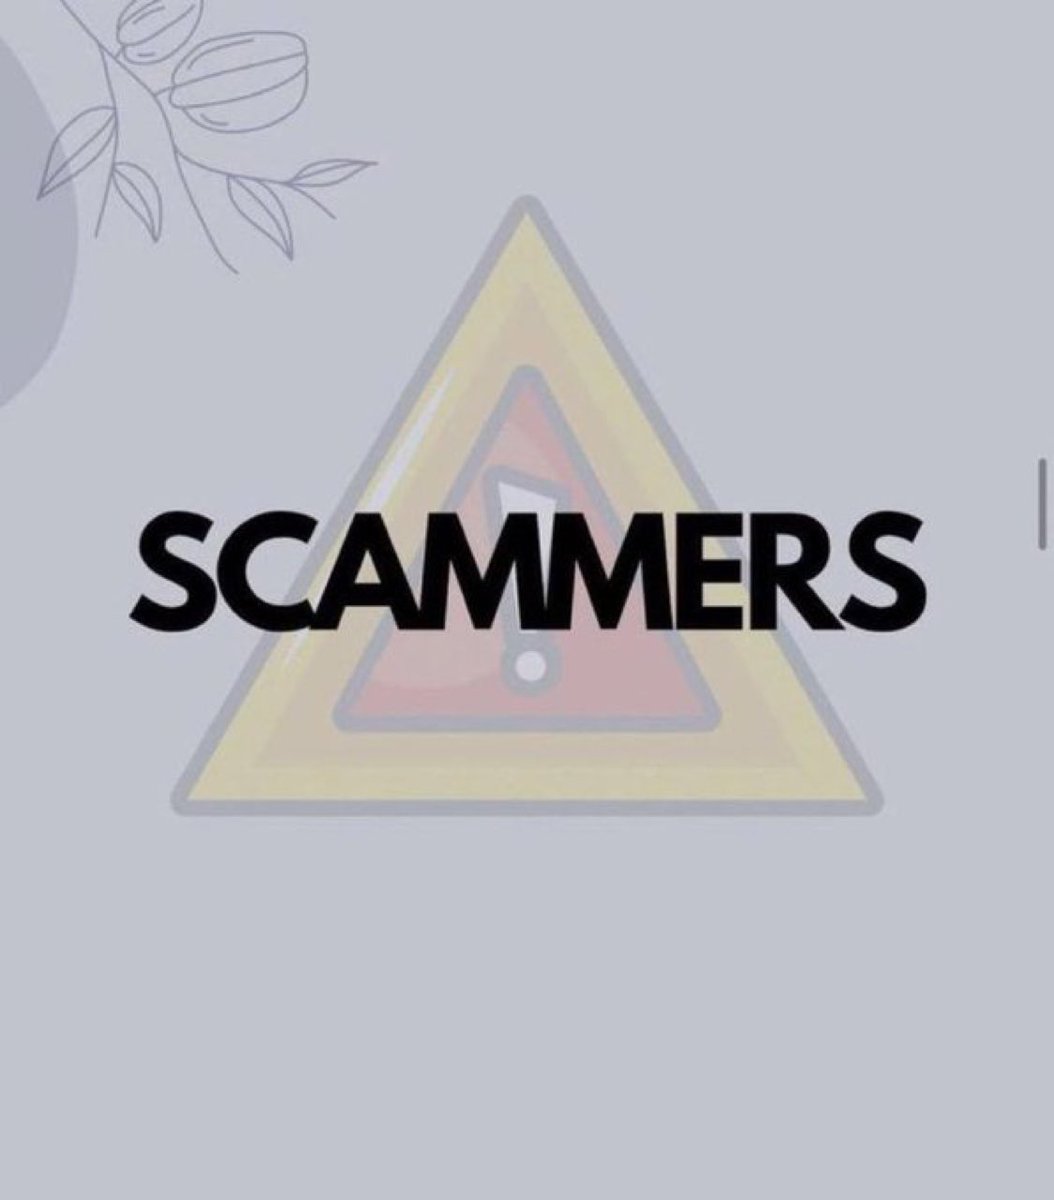 Exercise caution, as these platforms are fraudulent. Take immediate action to protect your profits. Send an urgent message 🚨 now. #ztexchange #bilaxy #sucoinx #bitkan #Gried #stellaverse #ftkieo #Nicheswap #Celsius #commaex